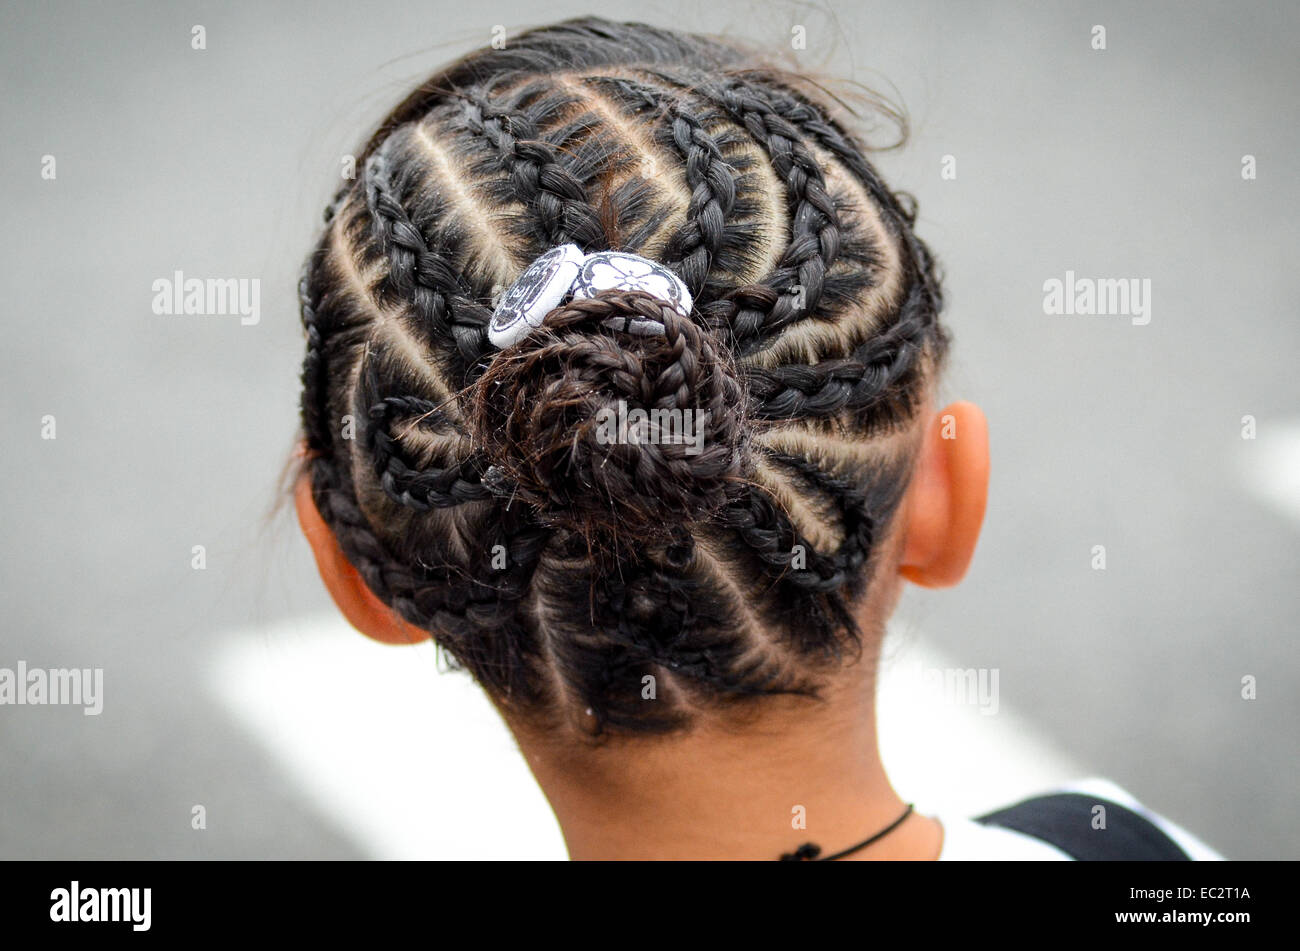 A girl with braided hair. Stock Photo